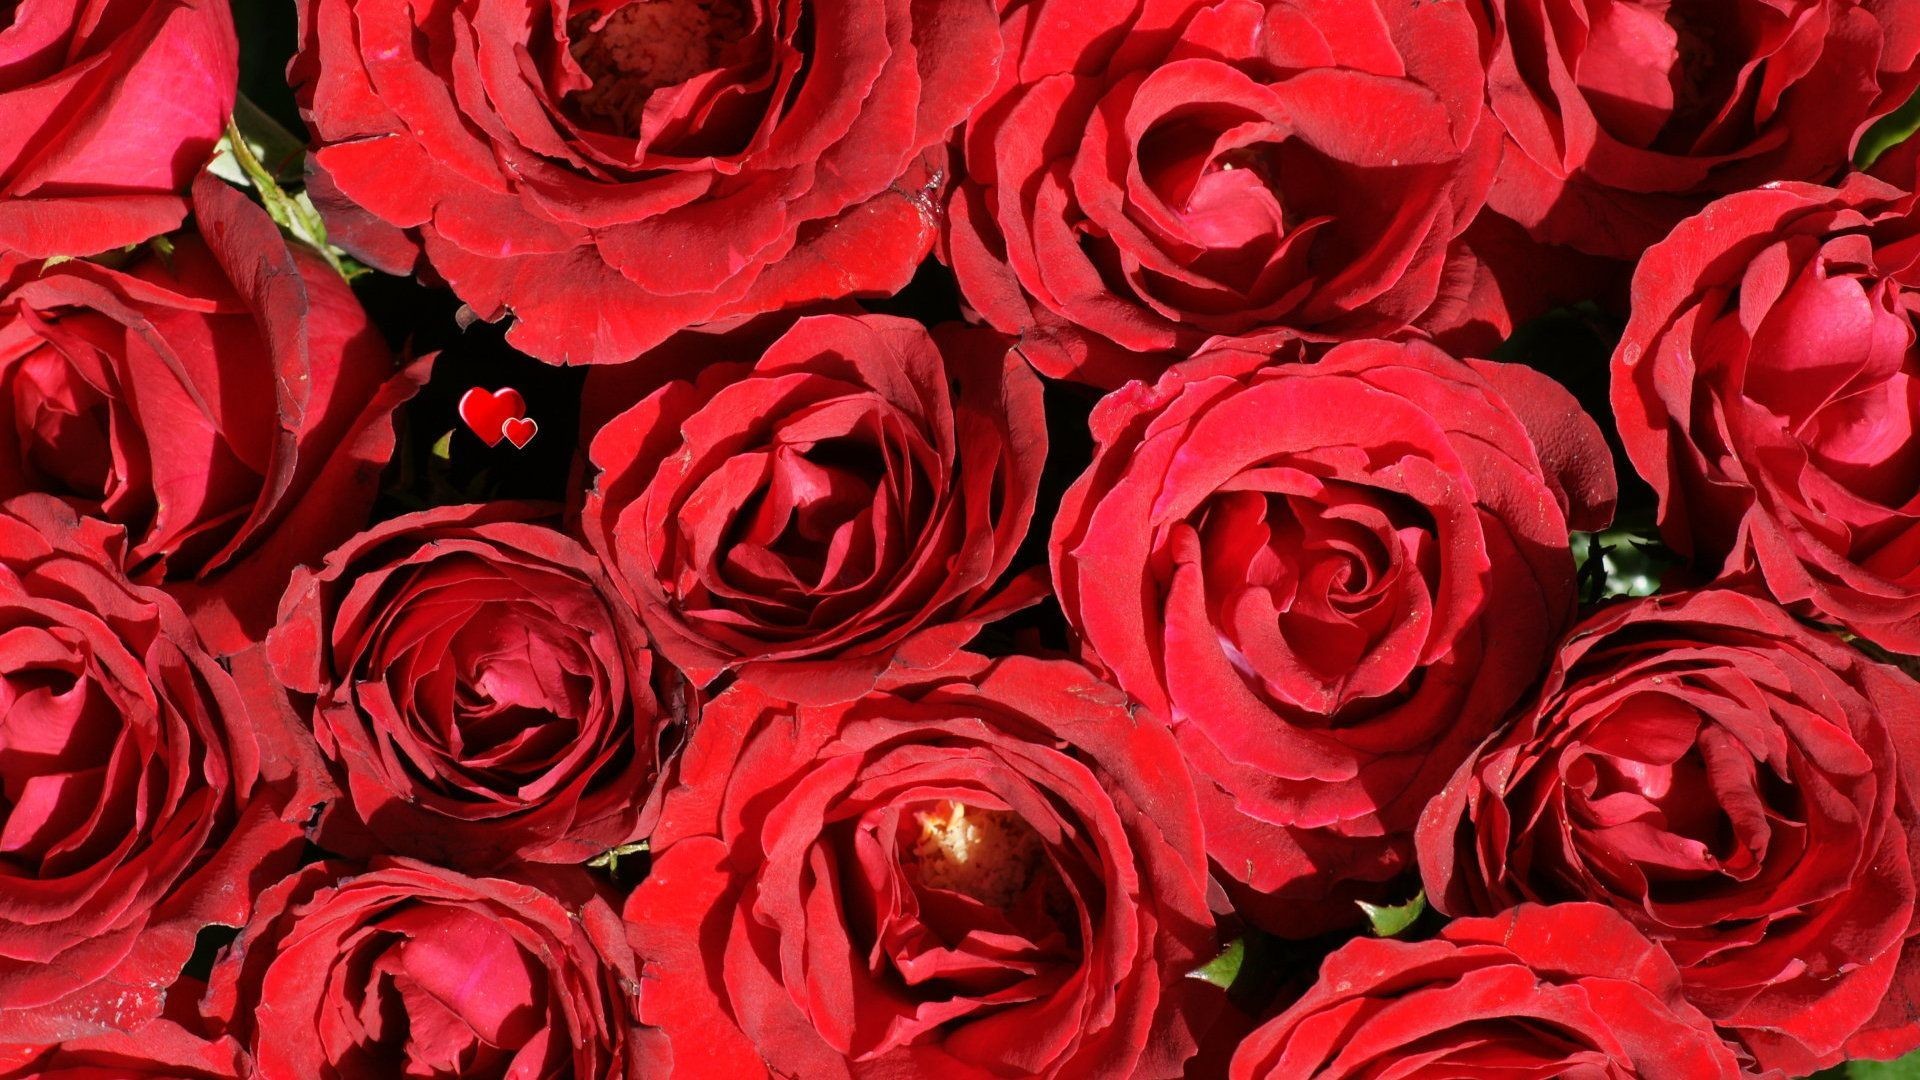 Red Roses, Most Popular Rose, Rose Wallpapers, Beautiful - Red Roses Background - HD Wallpaper 